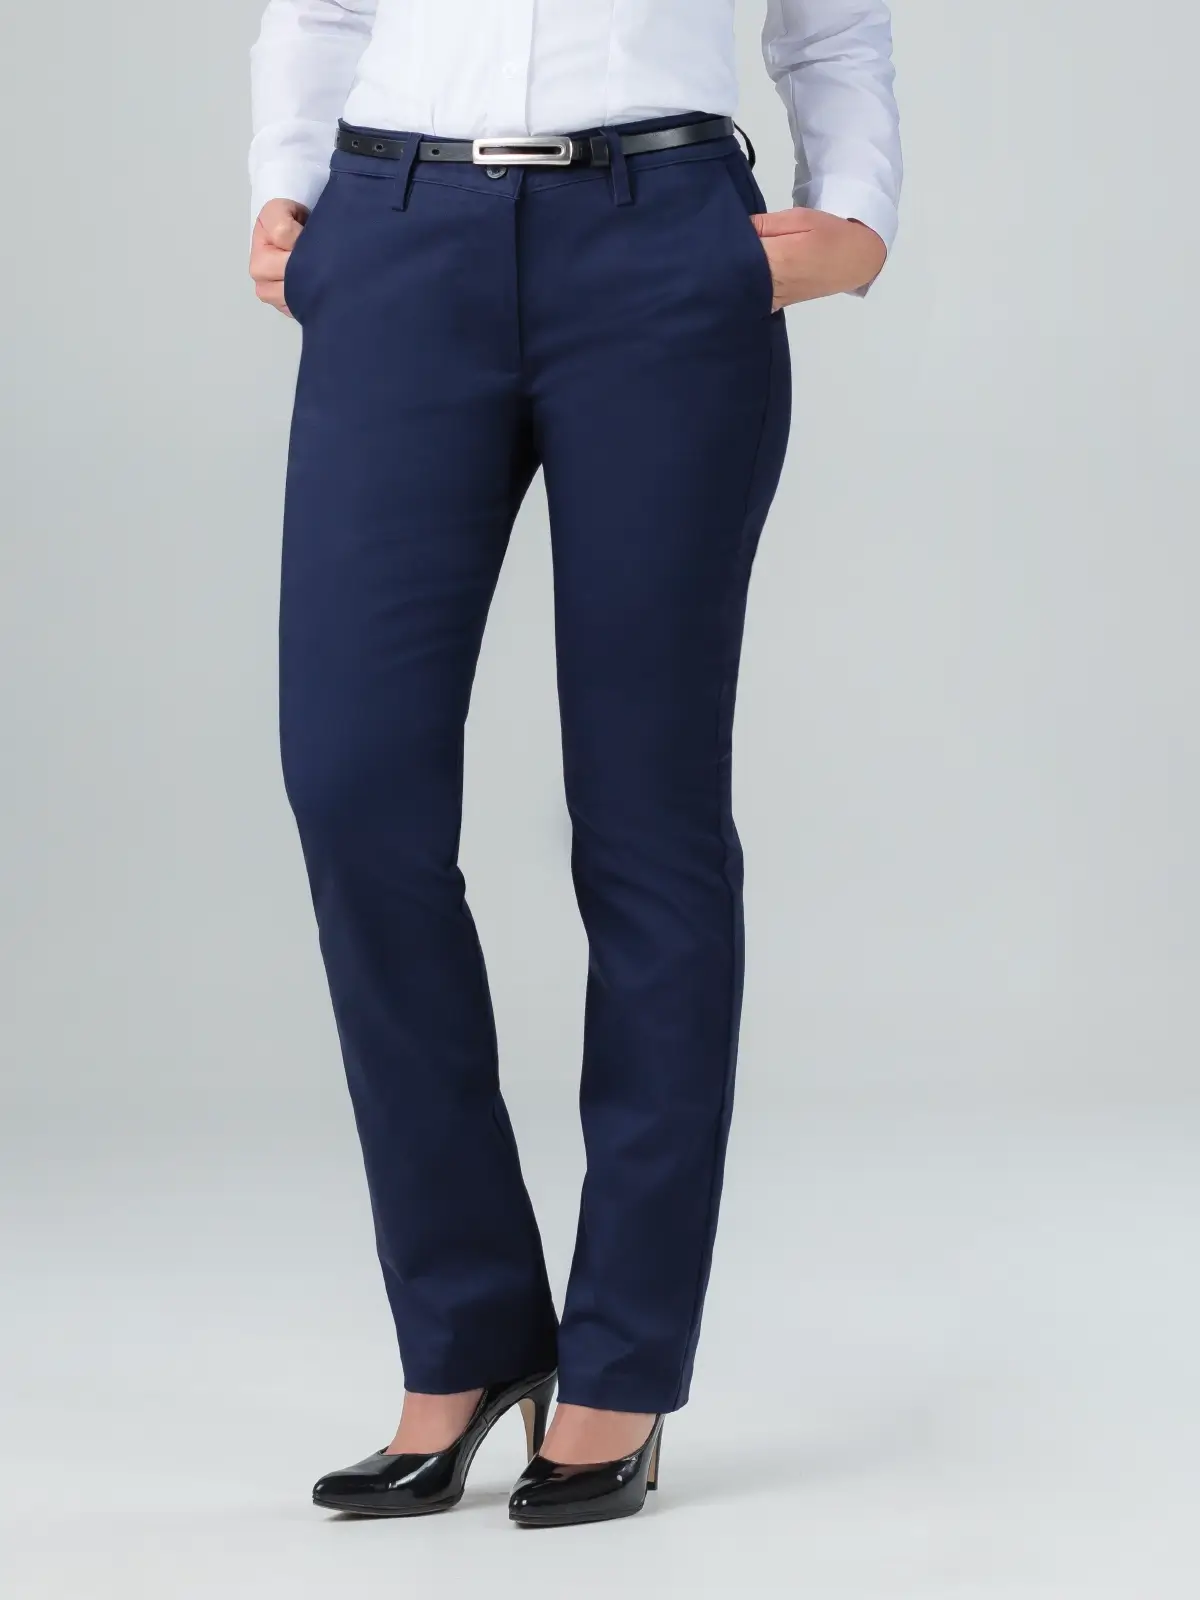 Navy executive pants for women front view